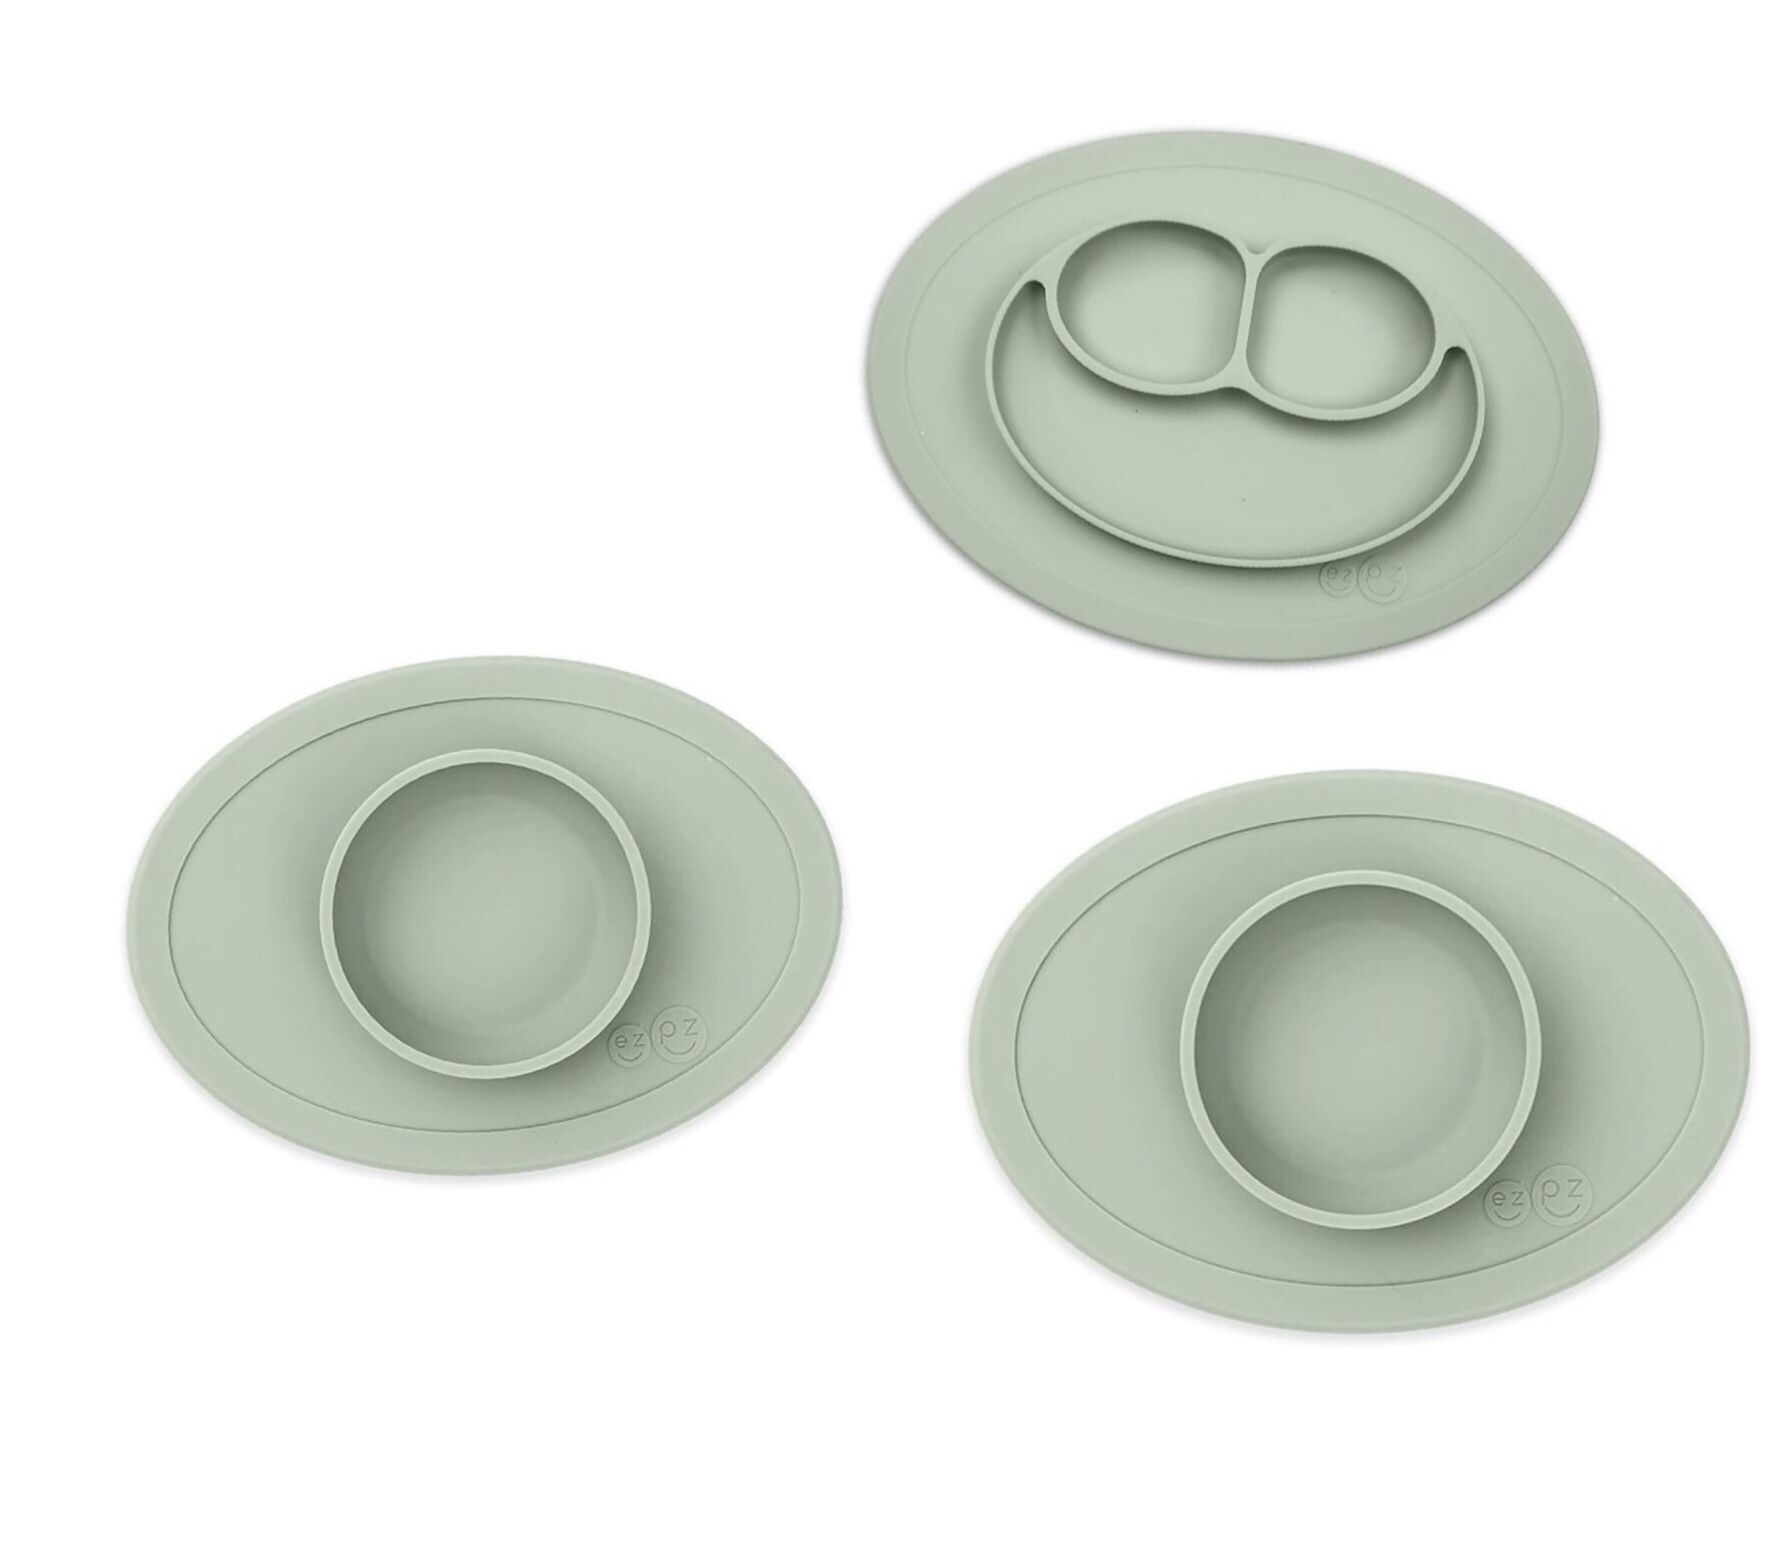 *New* EZPZ Bundle (Includes 2 Placemats + Bowl in One & Placemat + Plate in One)